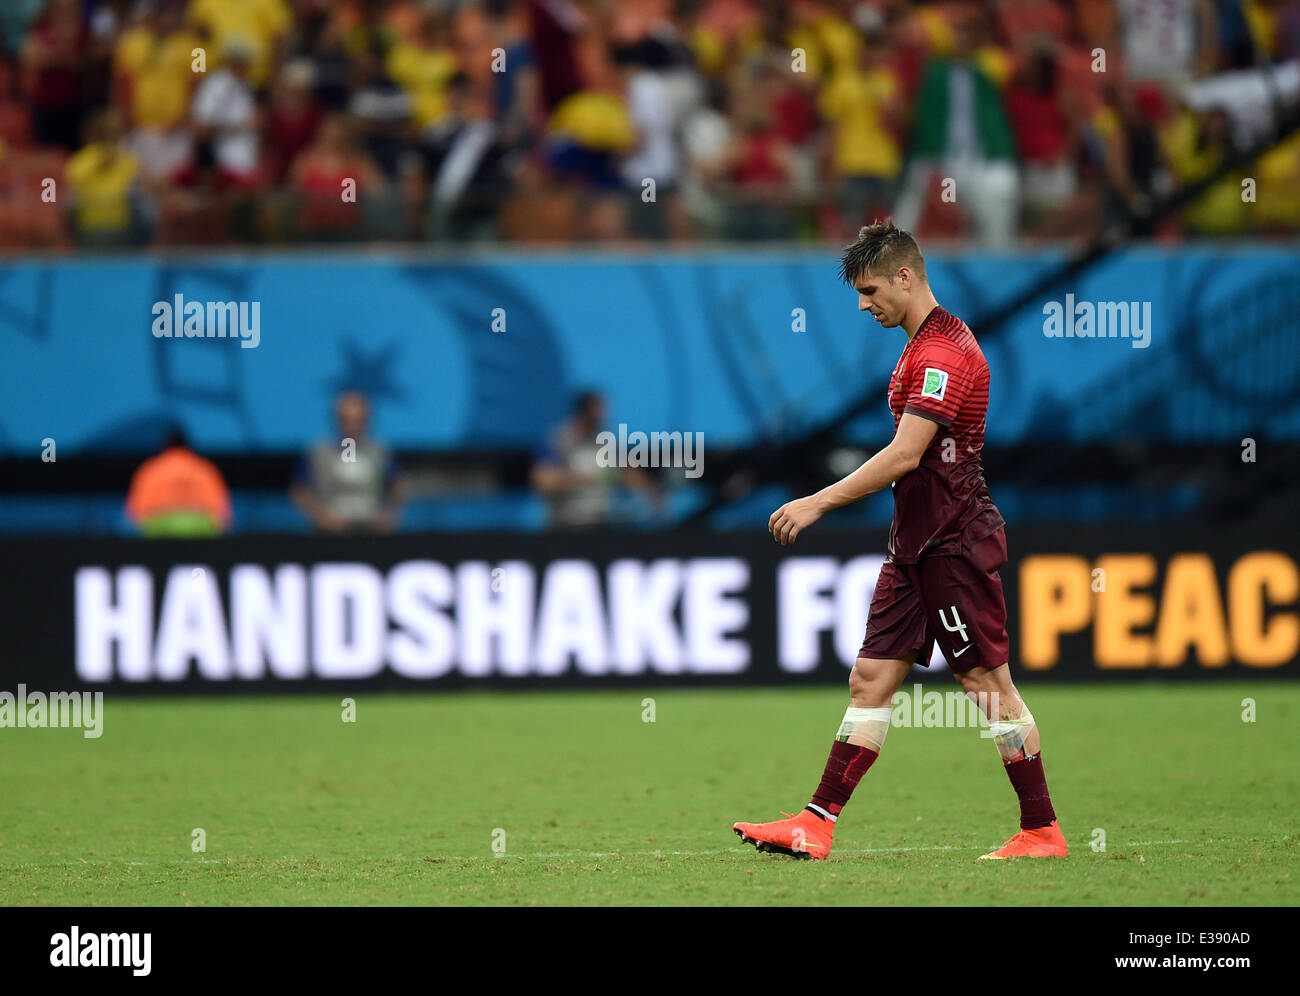 Manaus, Brazil. 22nd June, 2014. Miguel Veloso of Portugal reacts during the FIFA World Cup 2014 group G preliminary round match between the USA and Portugal at the Arena Amazonia Stadium in Manaus, Brazil, 22 June 2014. Photo: Marius Becker/dpa/Alamy Live News Stock Photo